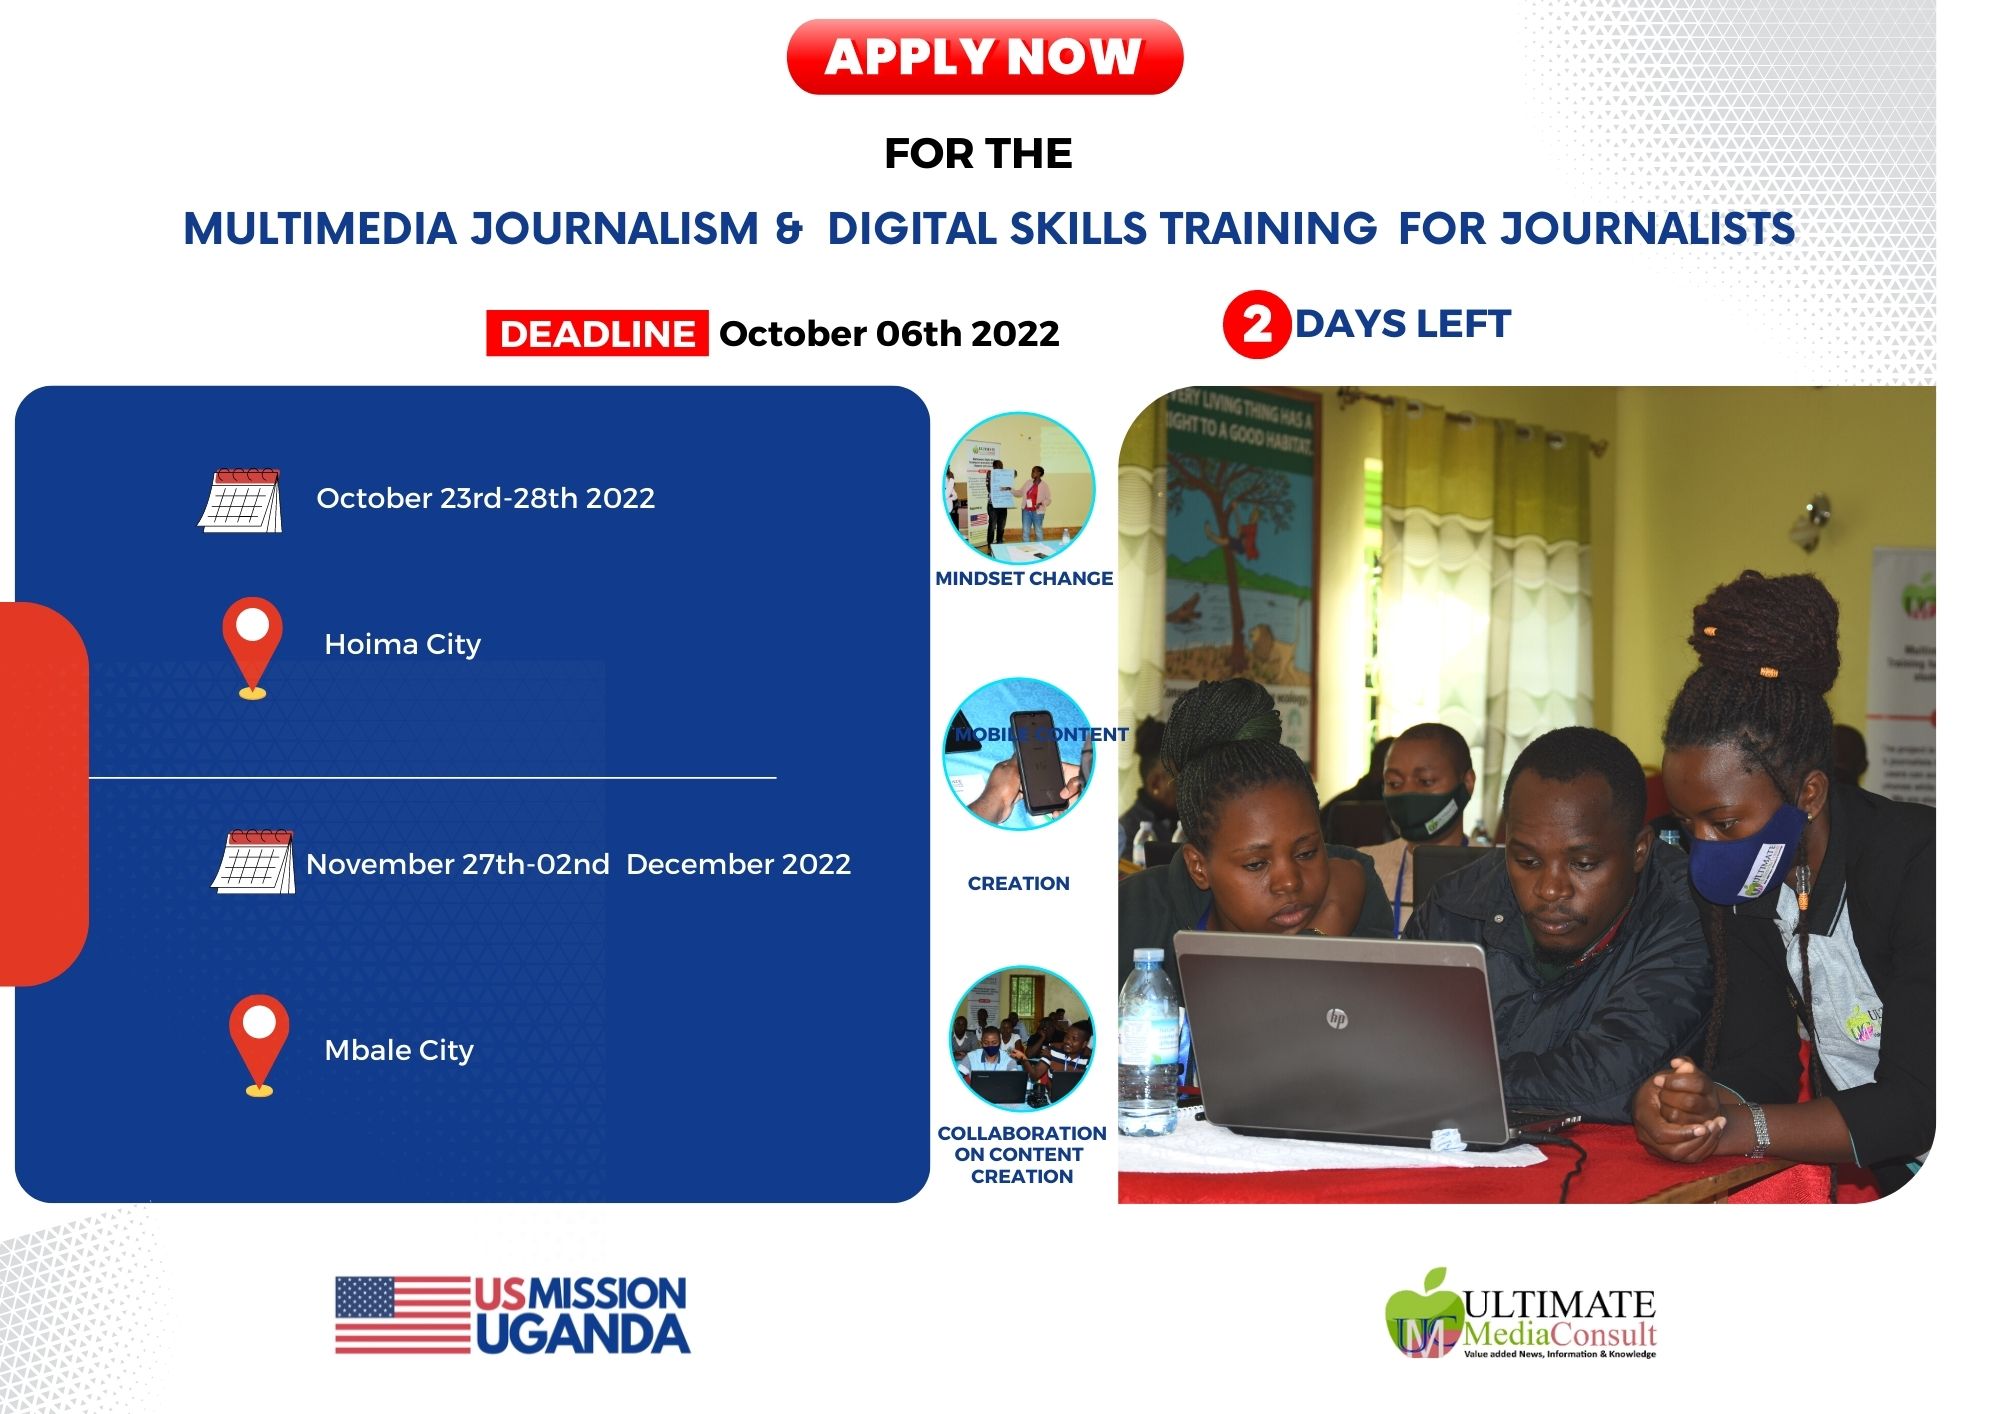 Applications Invited For Journalists To Be Trained In Multimedia Journalism and Digital Skills. 11